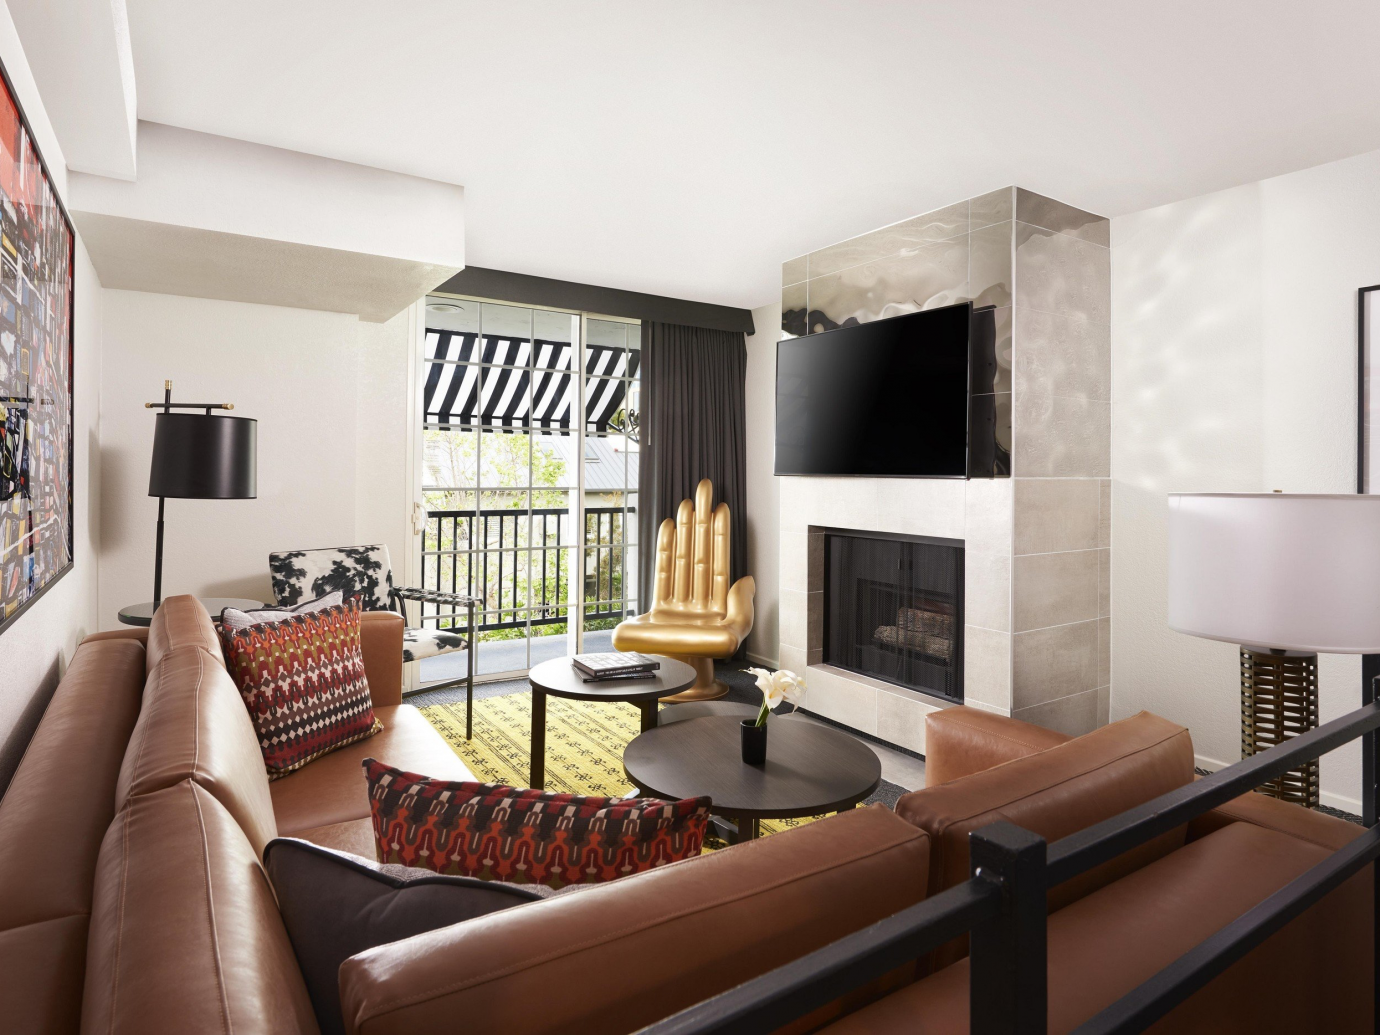 Interior living space at a suite Montrose